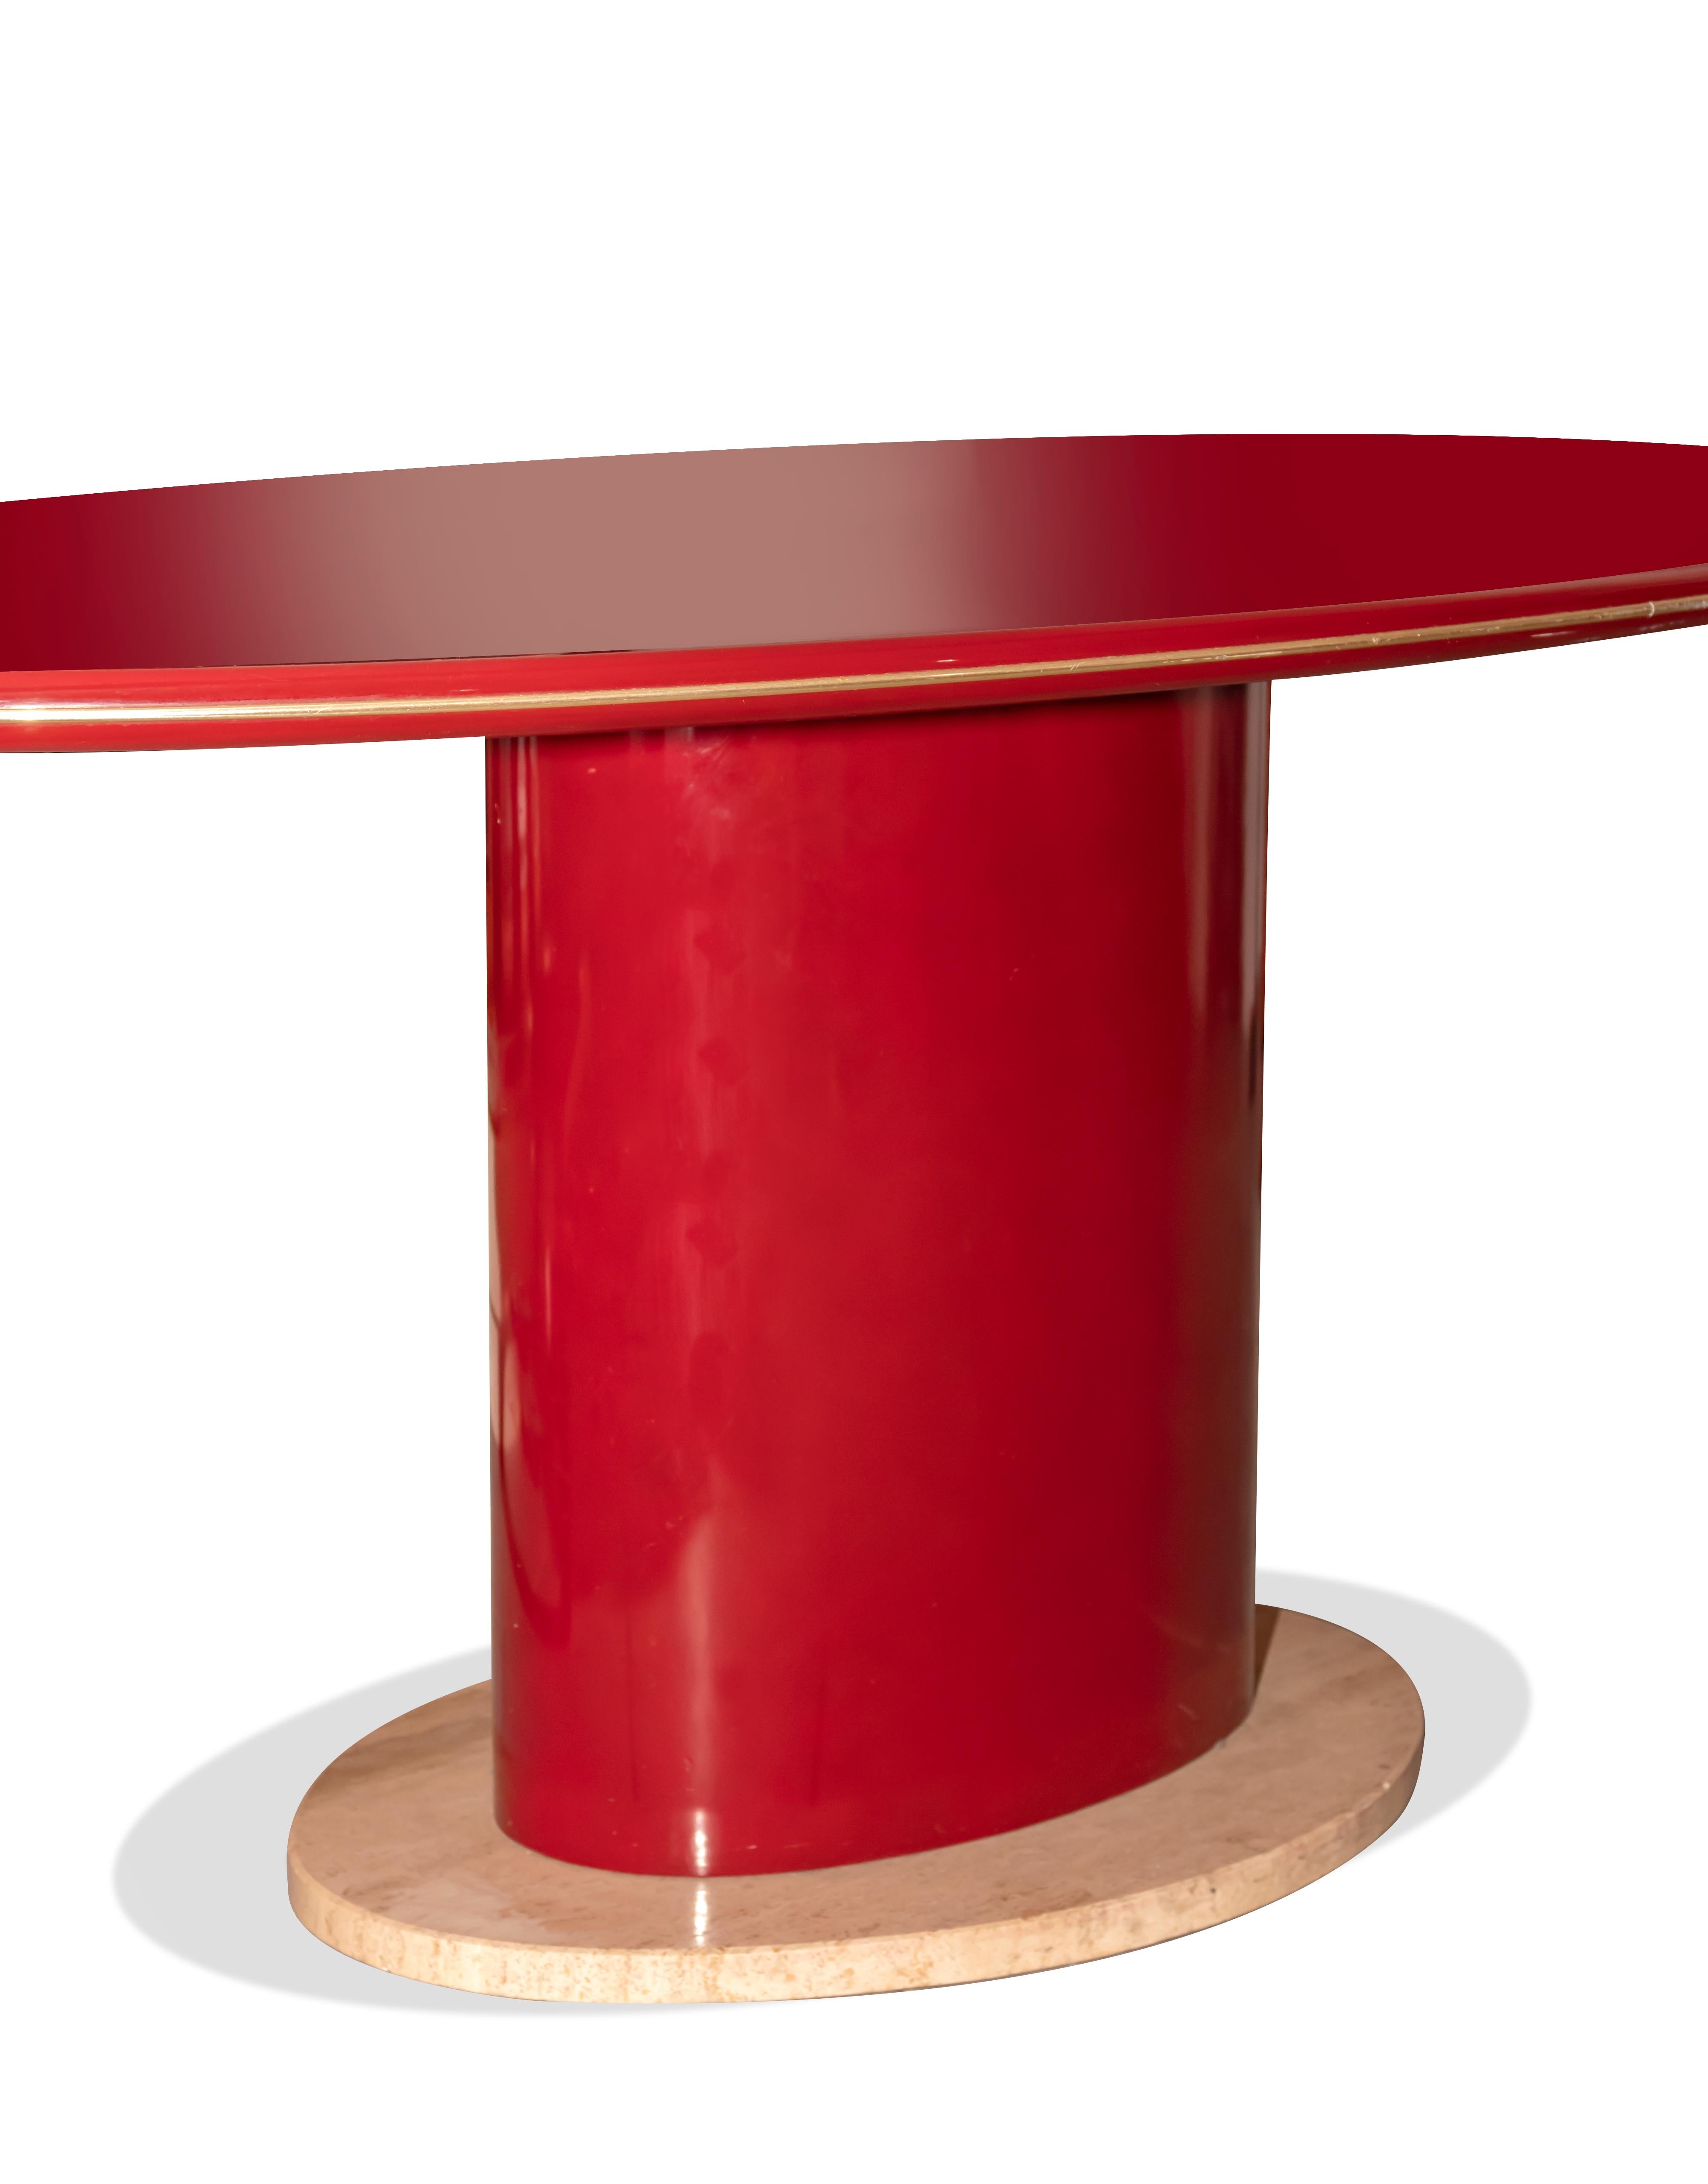 Red Marble table is a design item realized in Italy in the 1980s by Cini Boeri (19 June 1924 – Milan, 9 September 2020).

An icon red and and marble table to be collect.

Cini Boeri (19 June 1924 – Milan, 9 September 2020). Cini Boeri was an